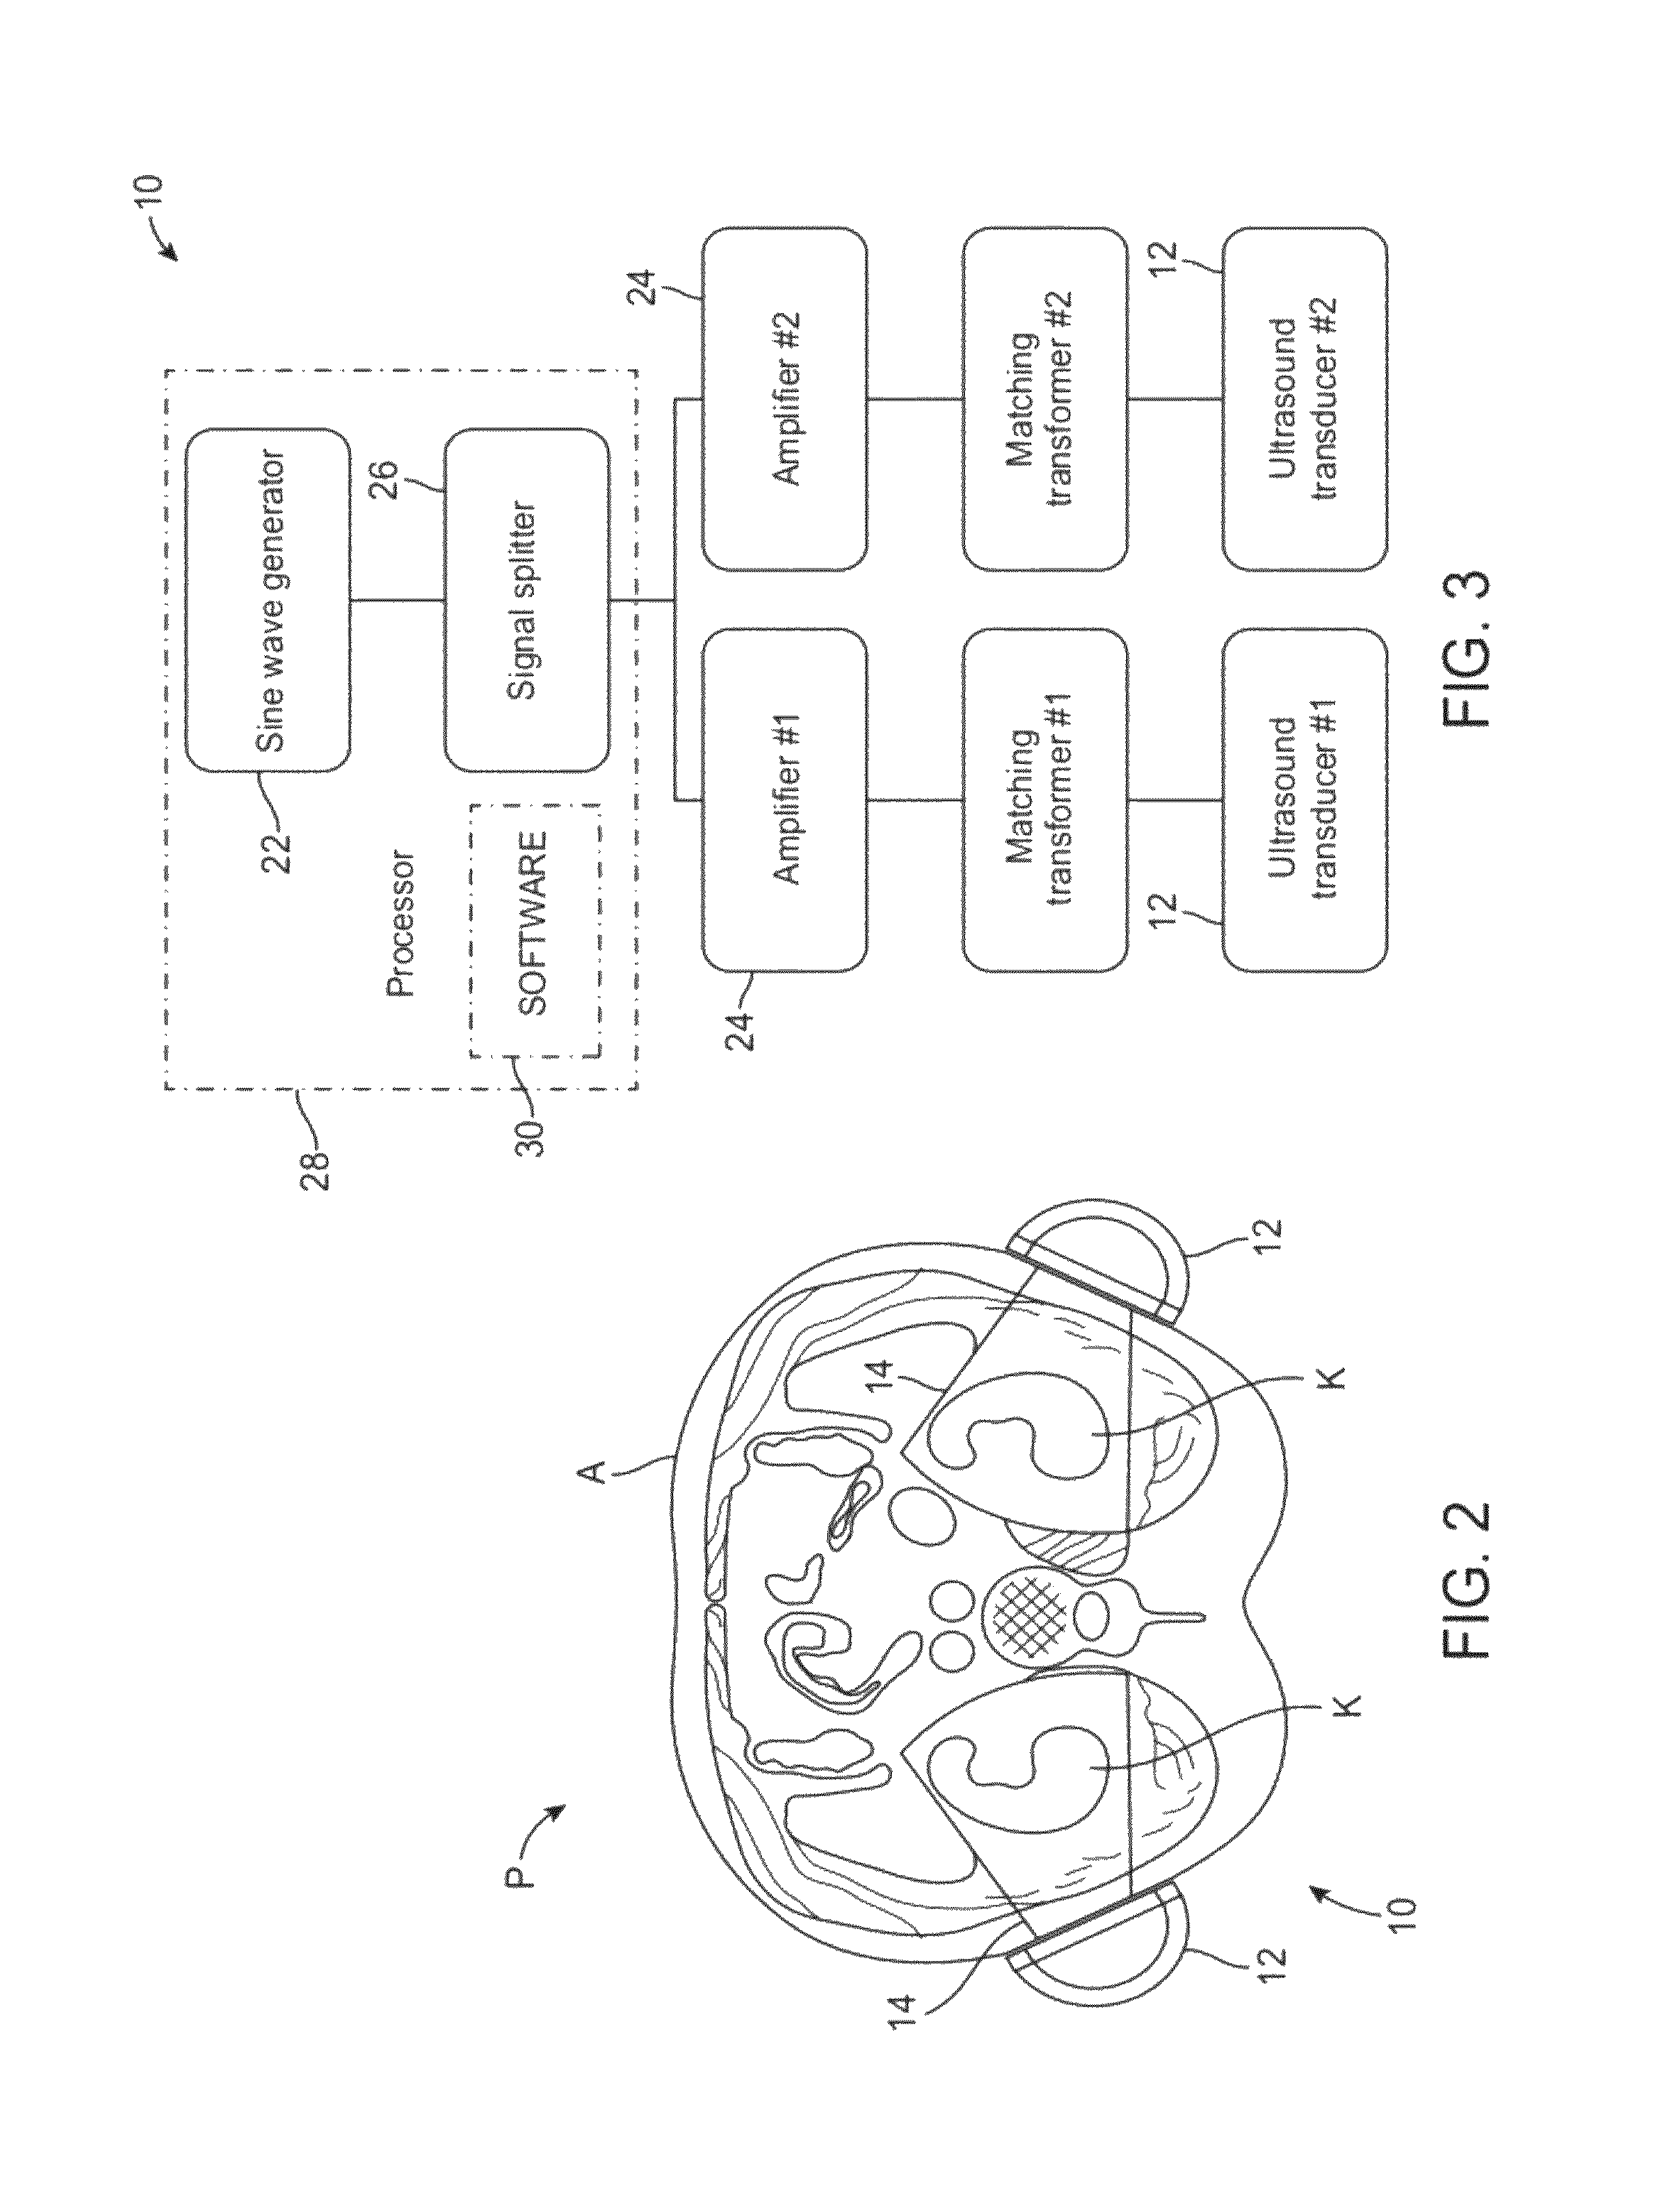 Macro/micro duty cycle devices, systems, and methods employing low-frequency ultrasound or other cyclical pressure energies